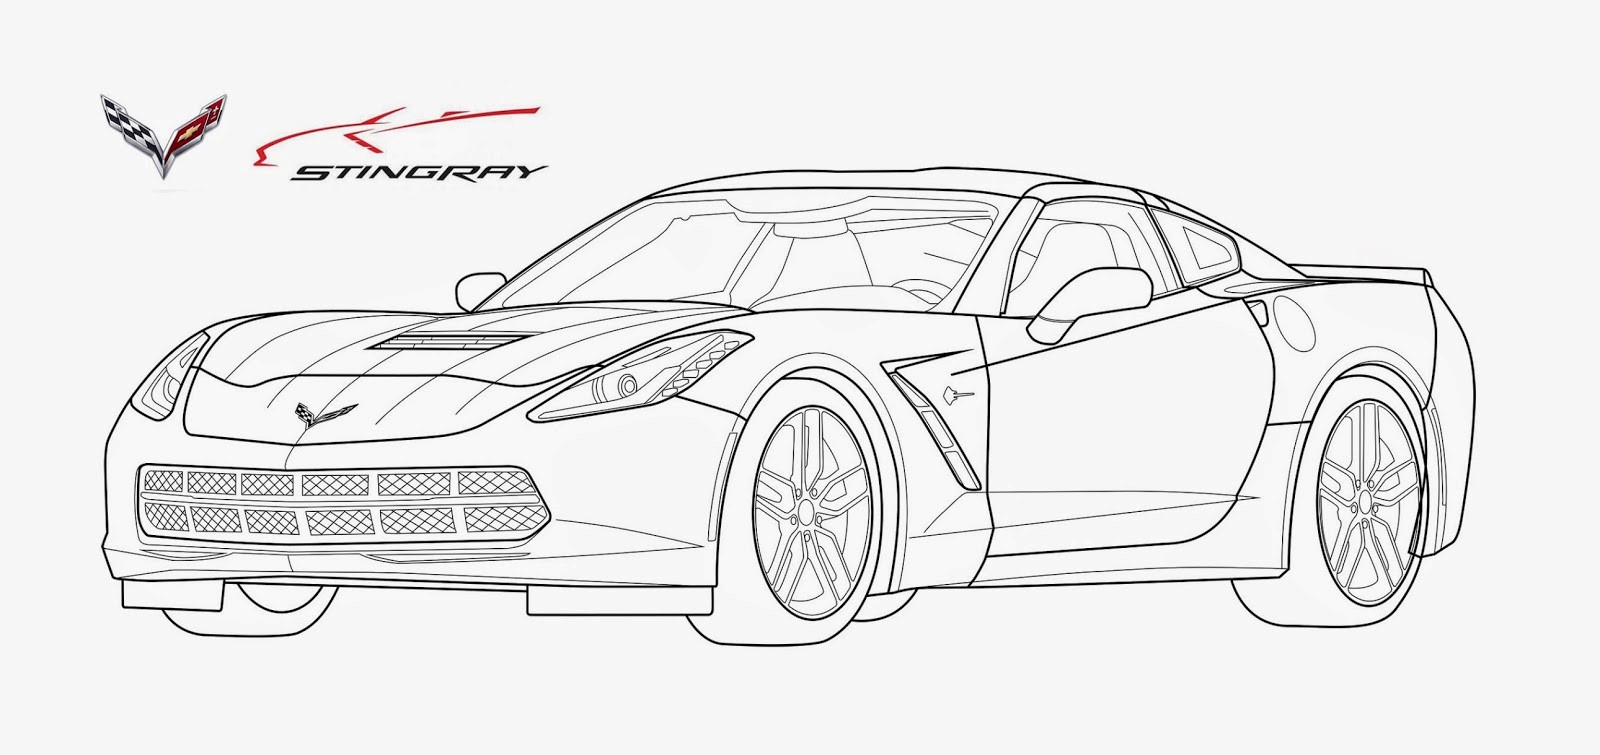 Fighting Boredom During Lockdown How About Some Corvette Coloring Pages Corvette Sales News Lifestyle Best coloring pages printable, please share page link. corvette coloring pages